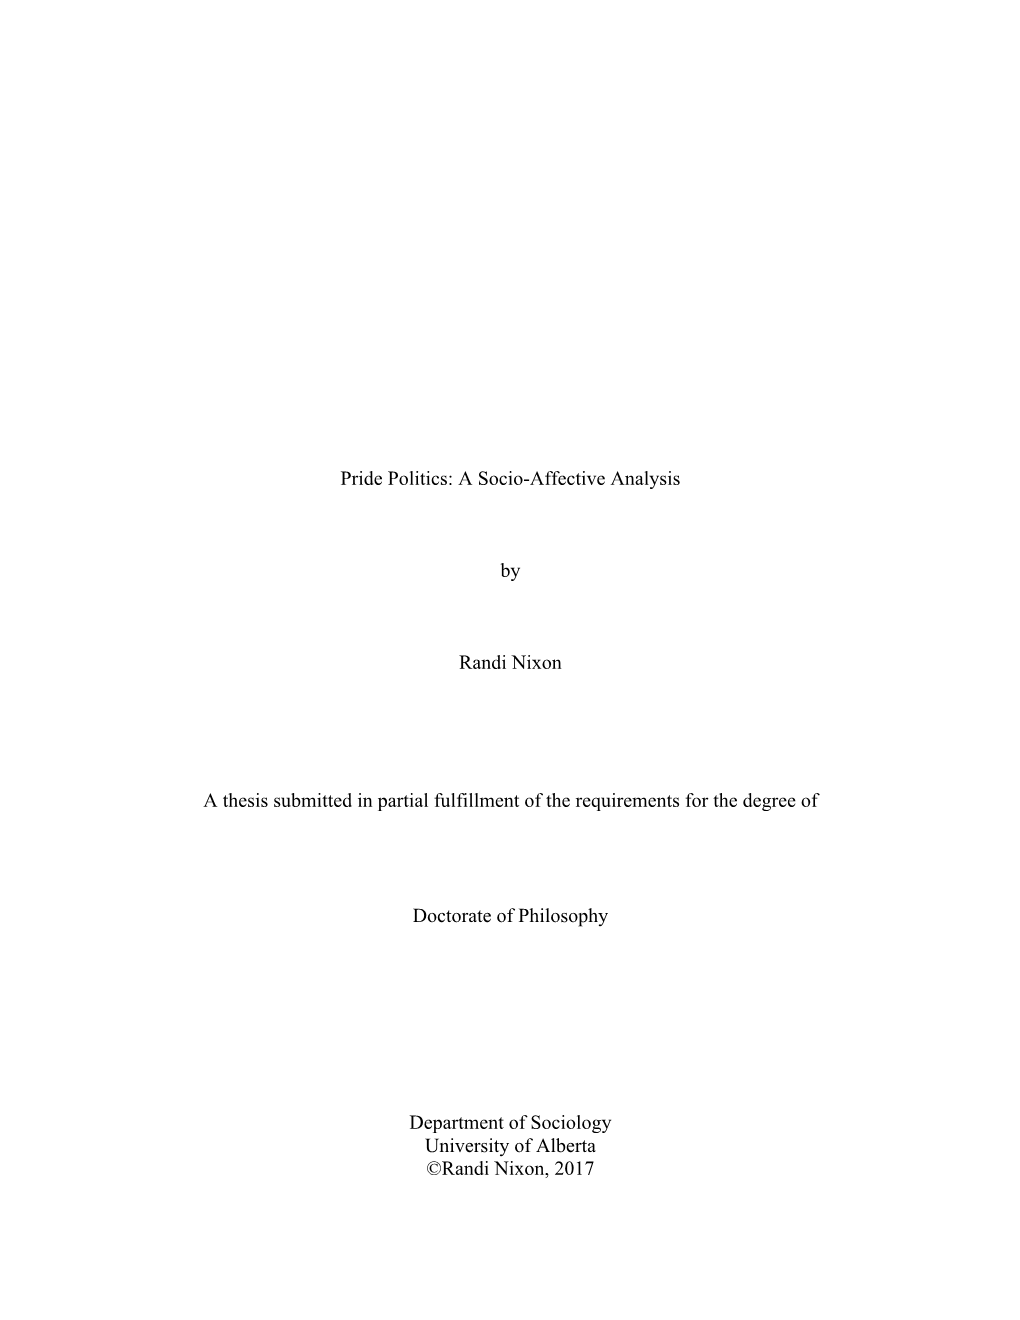 Pride Politics: a Socio-Affective Analysis by Randi Nixon a Thesis Submitted in Partial Fulfillment of the Requirements For